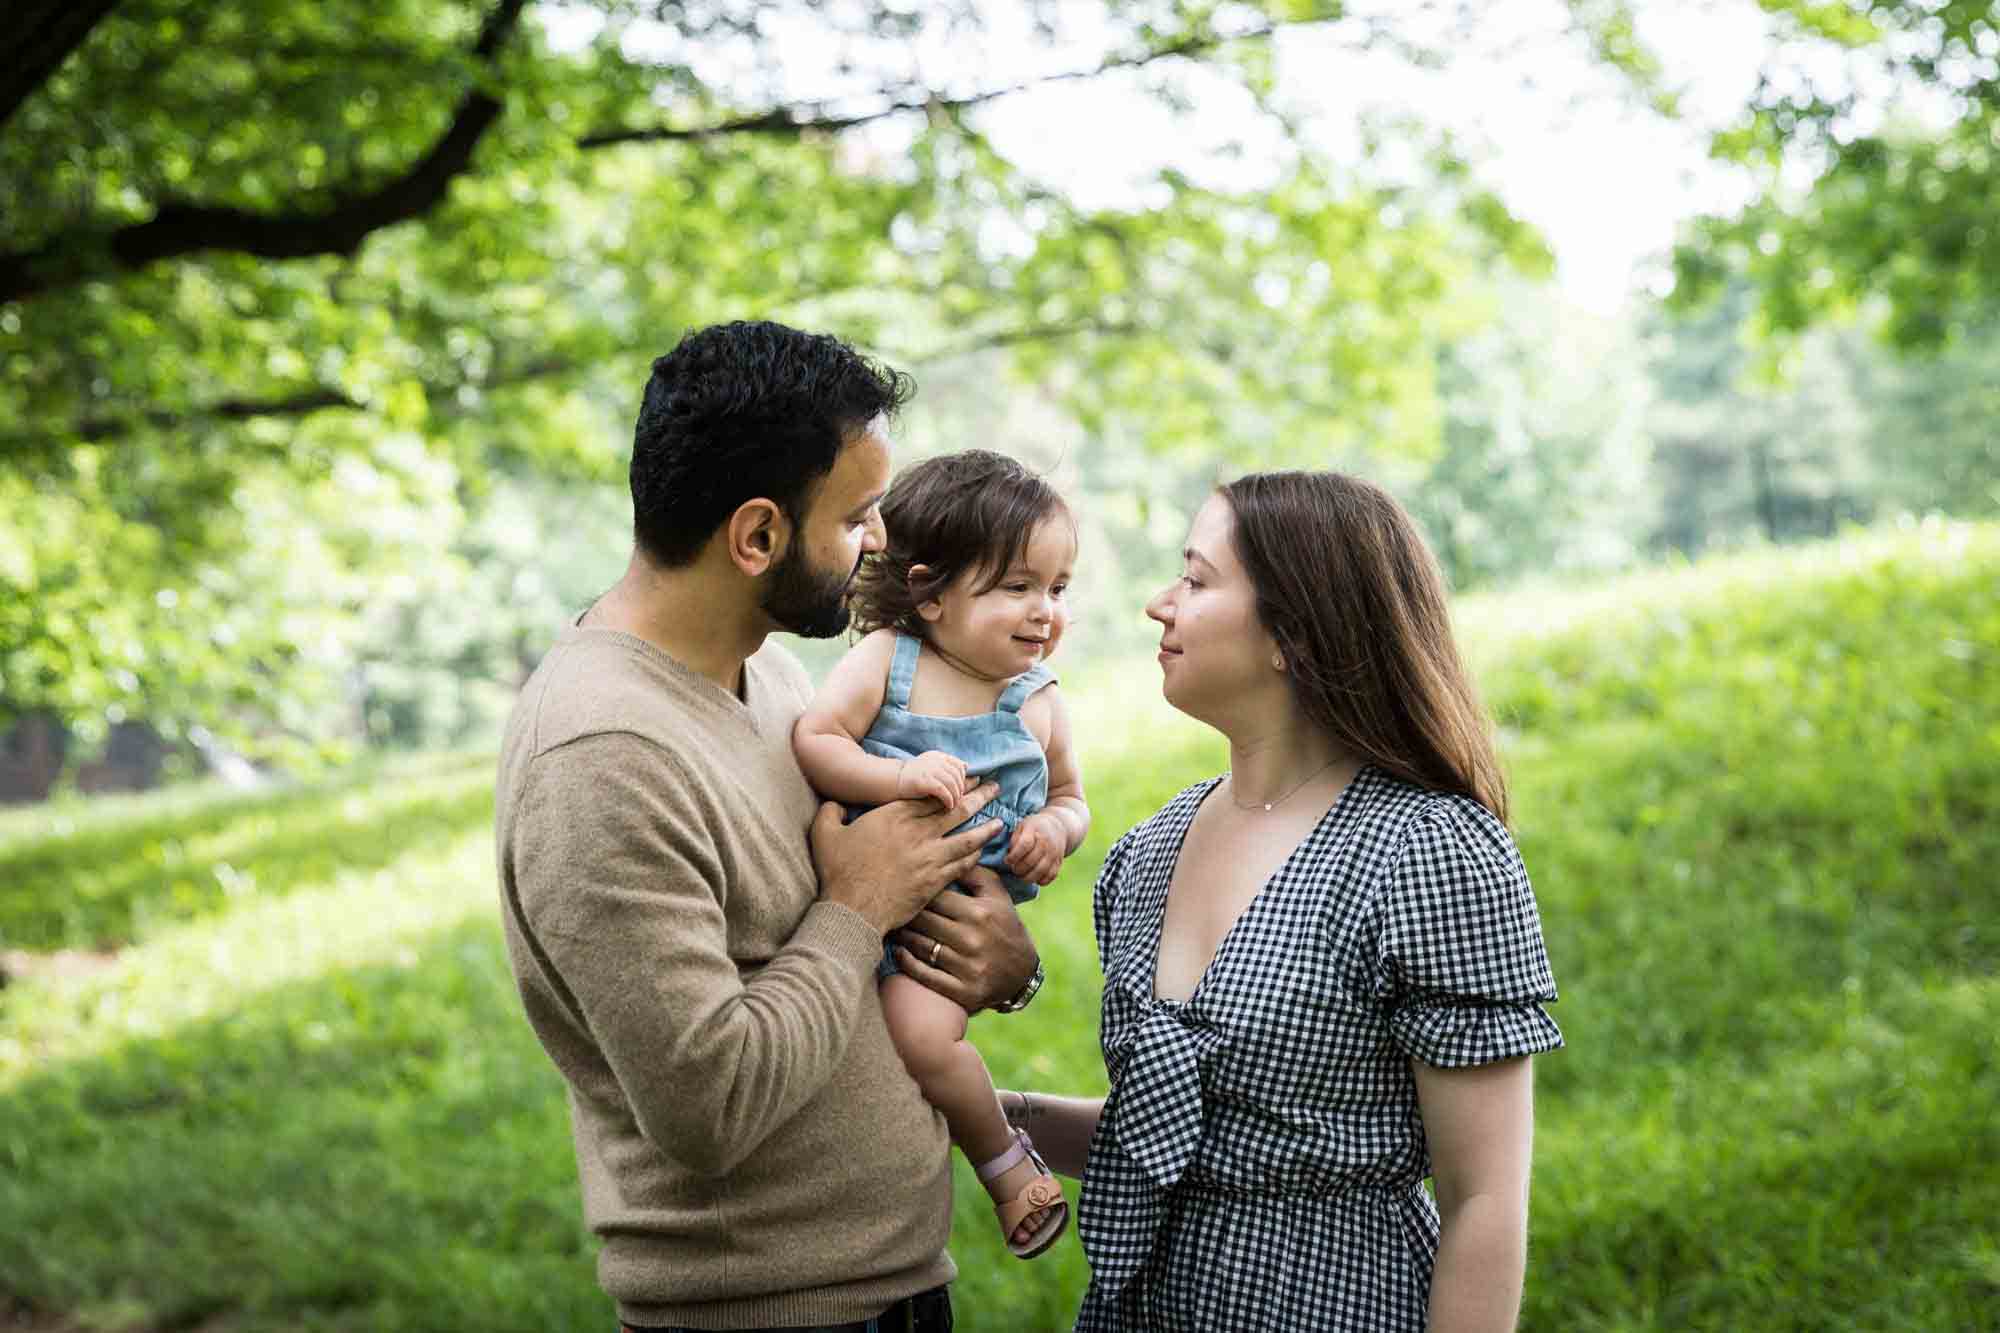 Parents focused on toddler in father's arms during a Fort Green Park family photo shoot